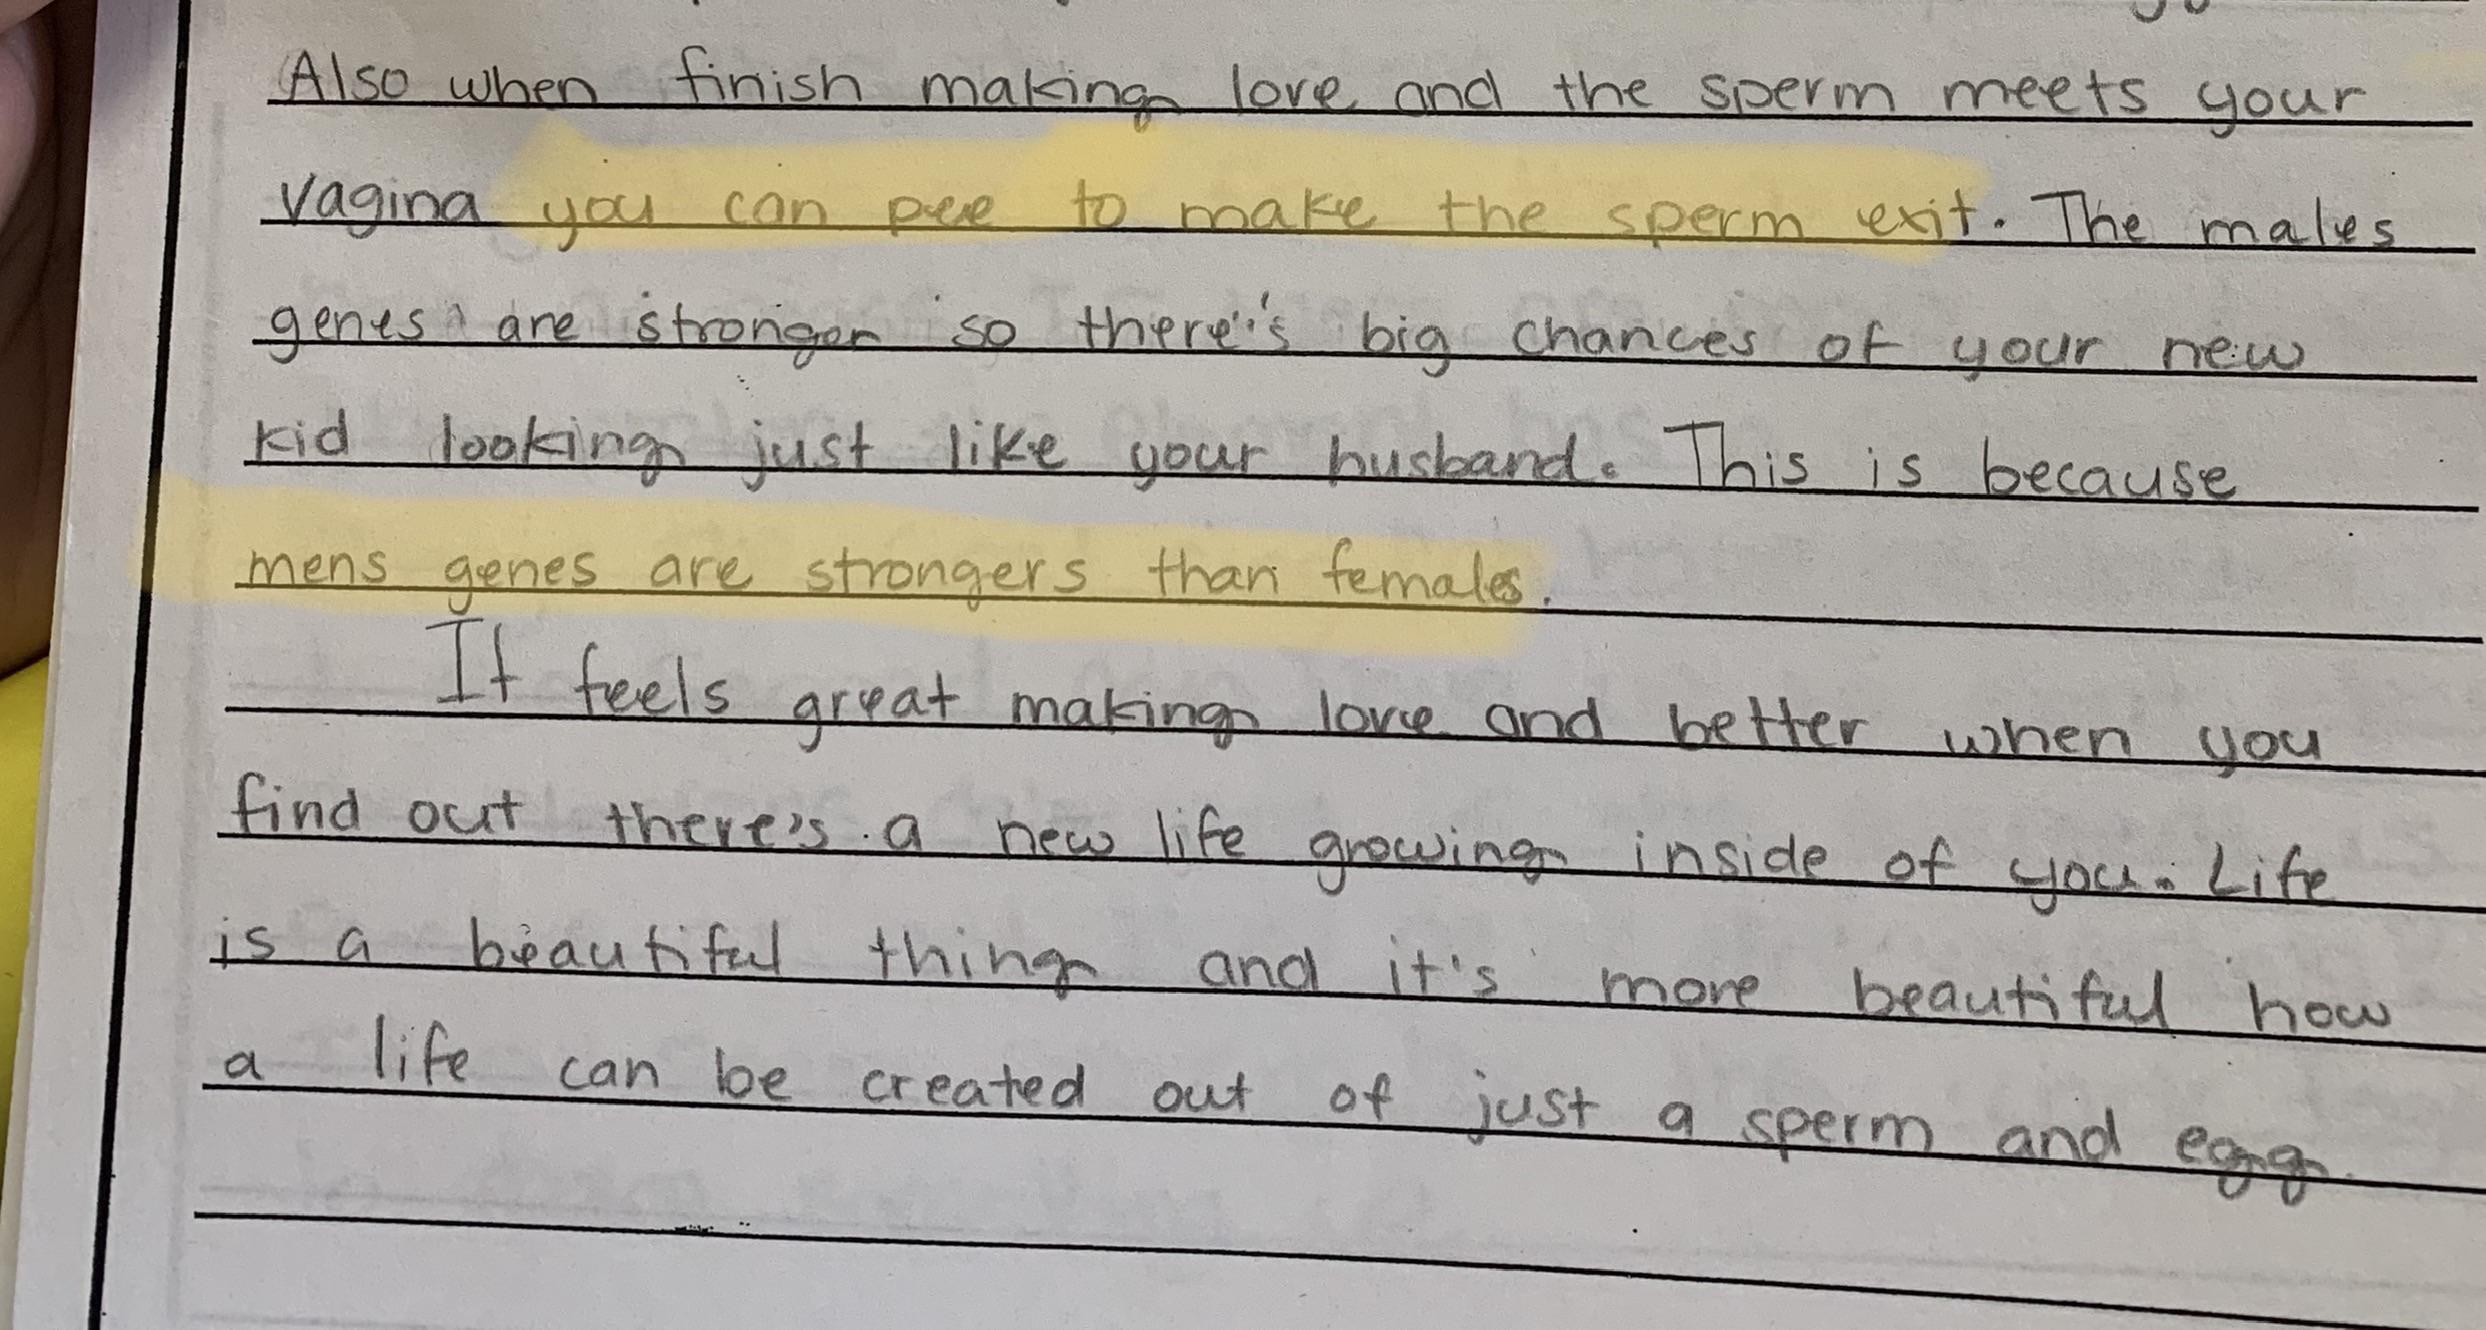 handwriting - Also when finish making love and the sperm meets your vagina you can pre to make the sperm exit. The males genes are stronger iso there's big chances of your new kid looking just your husband. This is because mens genes are strongers than fe